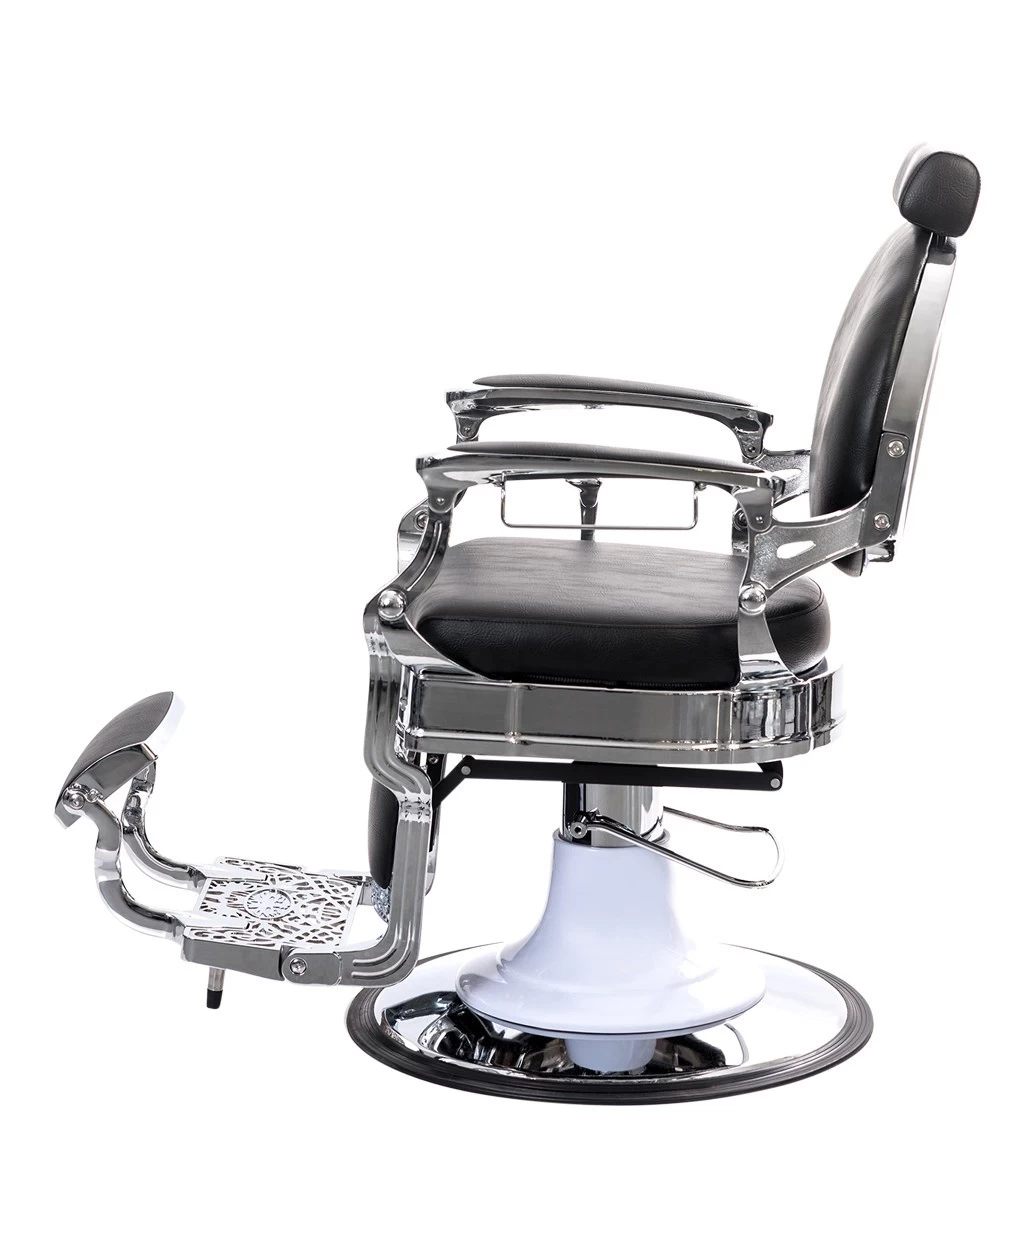 china barber chair manufacturer hot sale hairdressing chair hair salon chairs supplier DS-T231